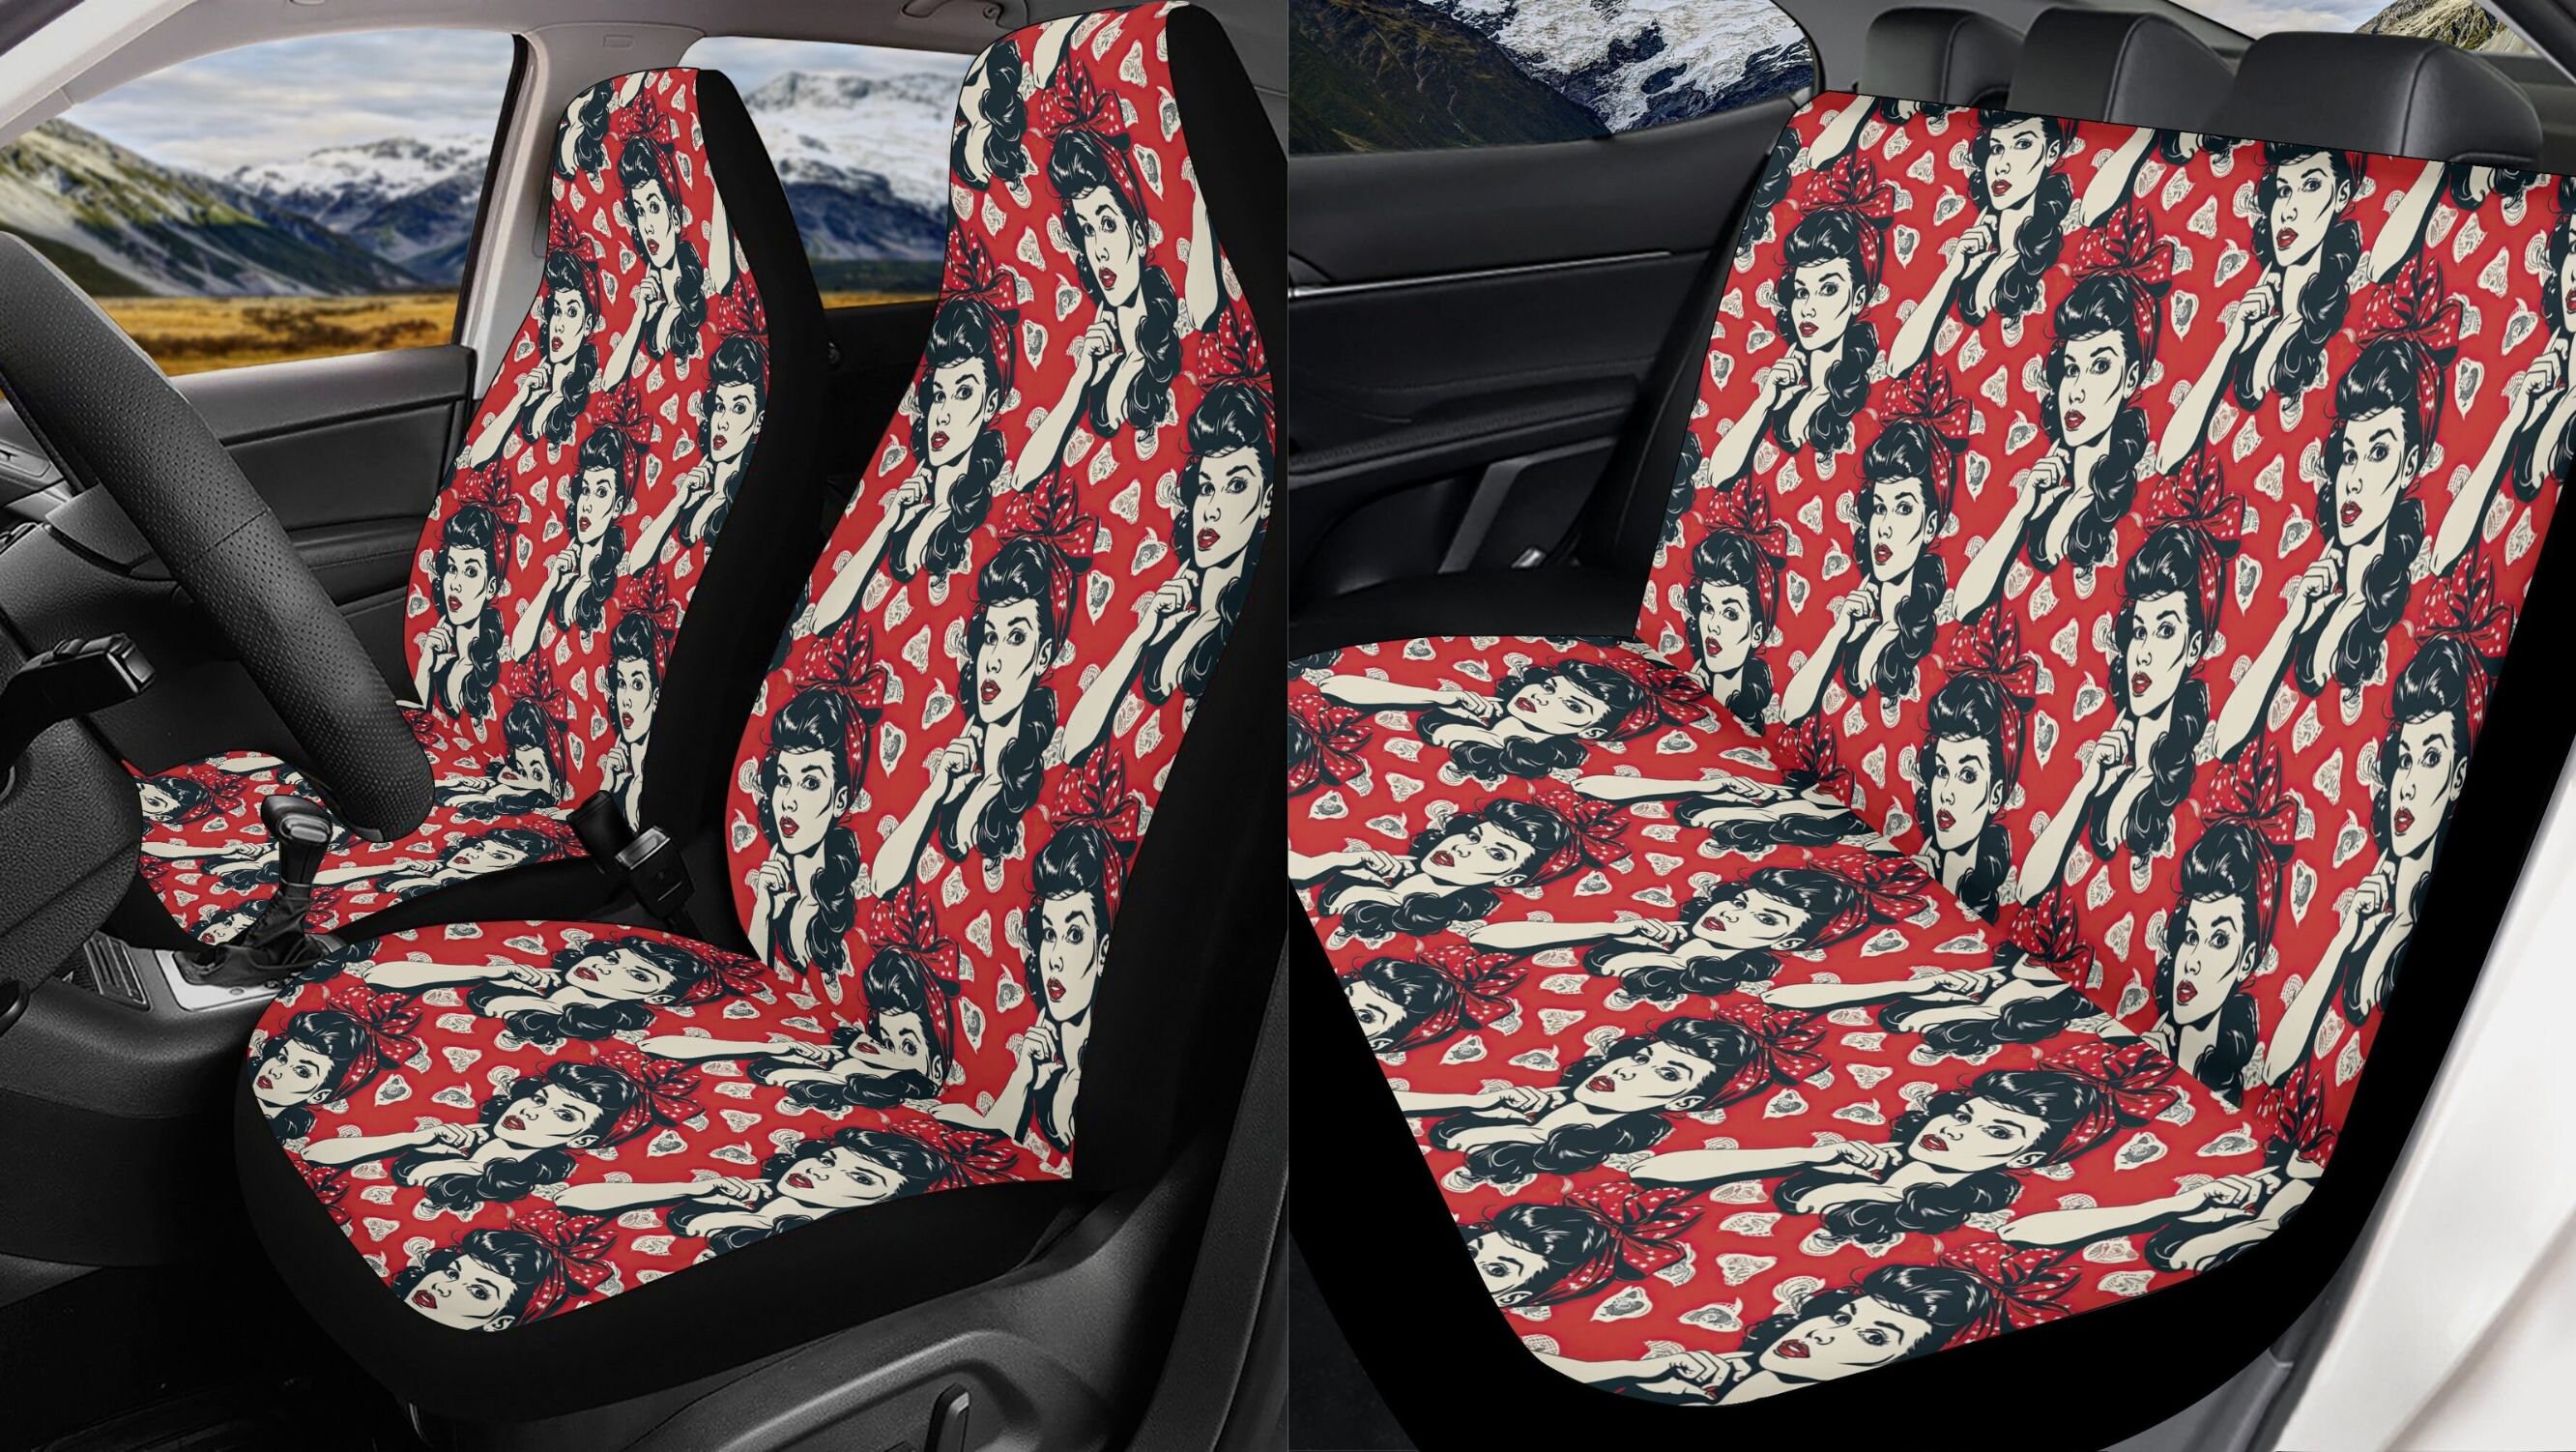 Kxmdxa Set of 2 Car Seat Covers 1950s Geometric Vintage 1960s 1970s 50s 60s 70s Abstract Universal Auto Front SEATS Protector Fits for Car,SUV Sedan